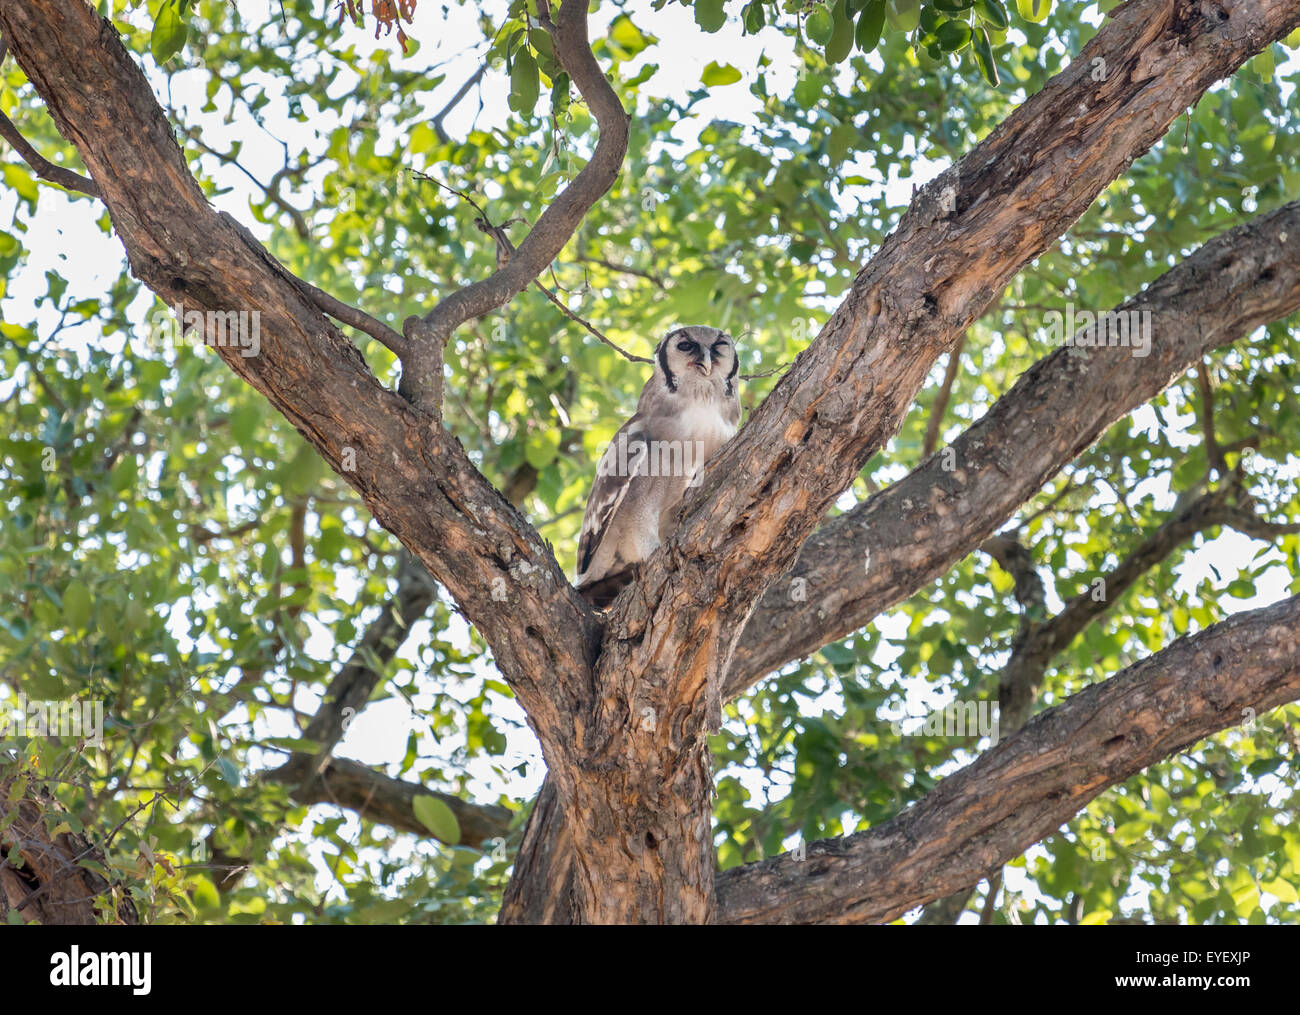 Verraux's Eagle-Owl, Bubo lacteus, the largest African owl, perching in a tree in the Okavango Delta, northern Botswana, Africa Stock Photo